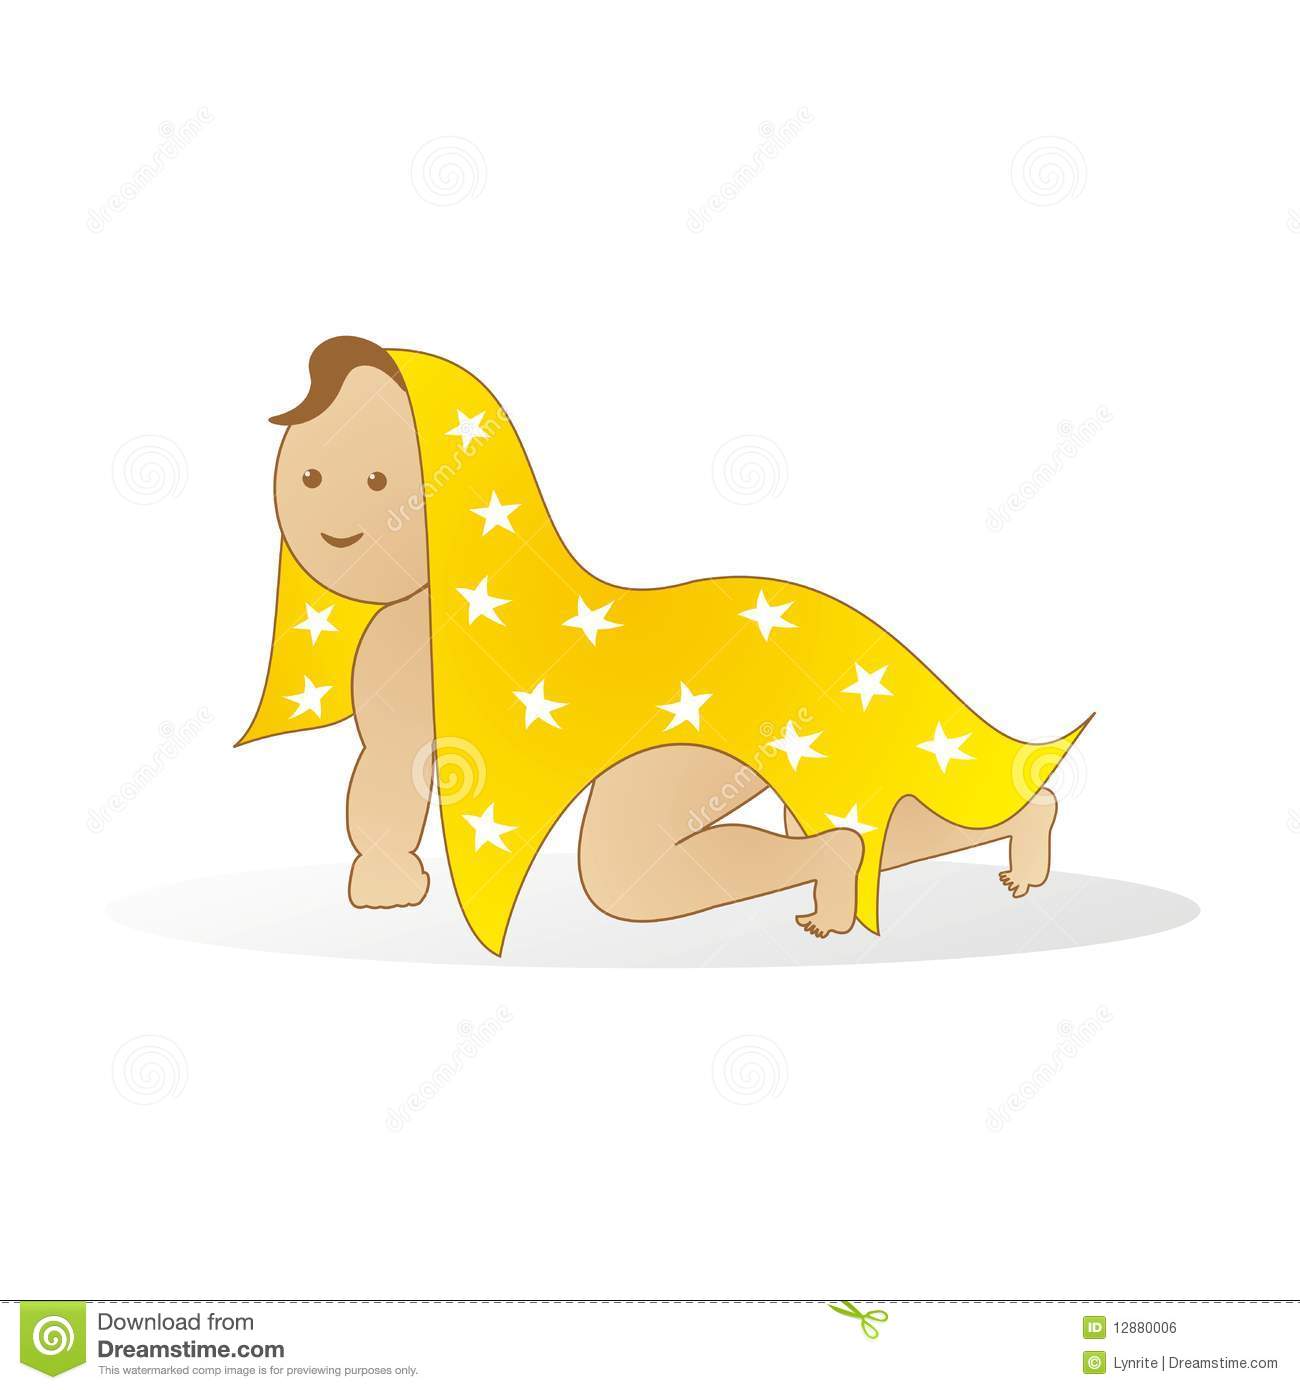 Baby Crawling With Star Blanket Royalty Free Stock Image   Image